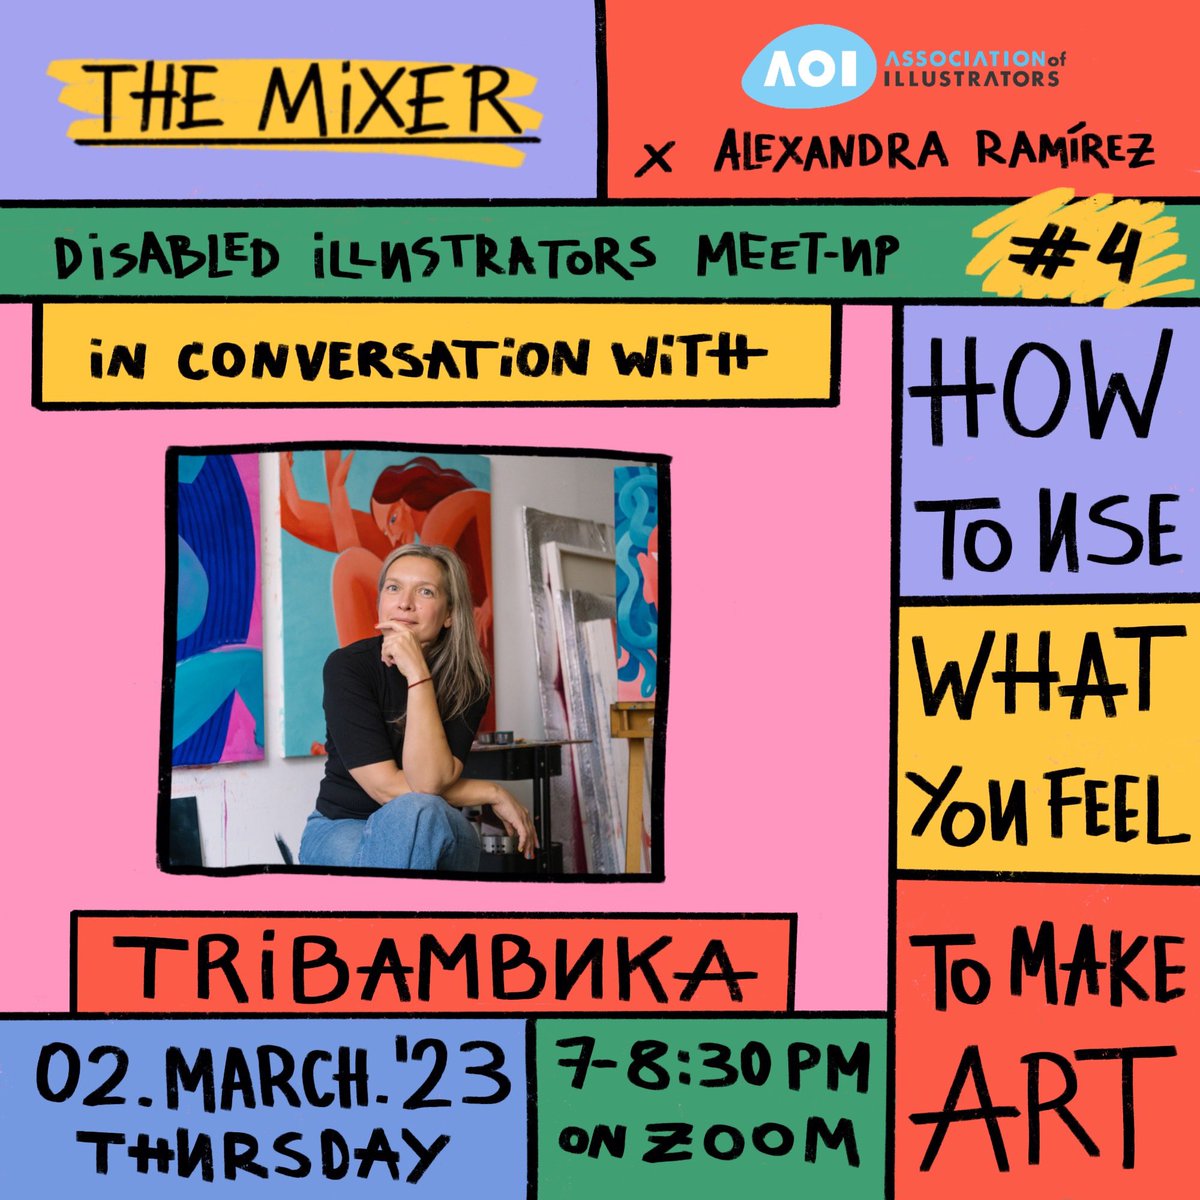 I'm very excited to have Anastasia Tribambuka as a speaker to the series of talks which I'm hosting with AOI - Association of Illustrators 💙Grab your tickets here ↓ lnkd.in/eC8WR7ka #meetup #illustration #disabilityawareness #illustrator #creative @theaoi @tribambuka